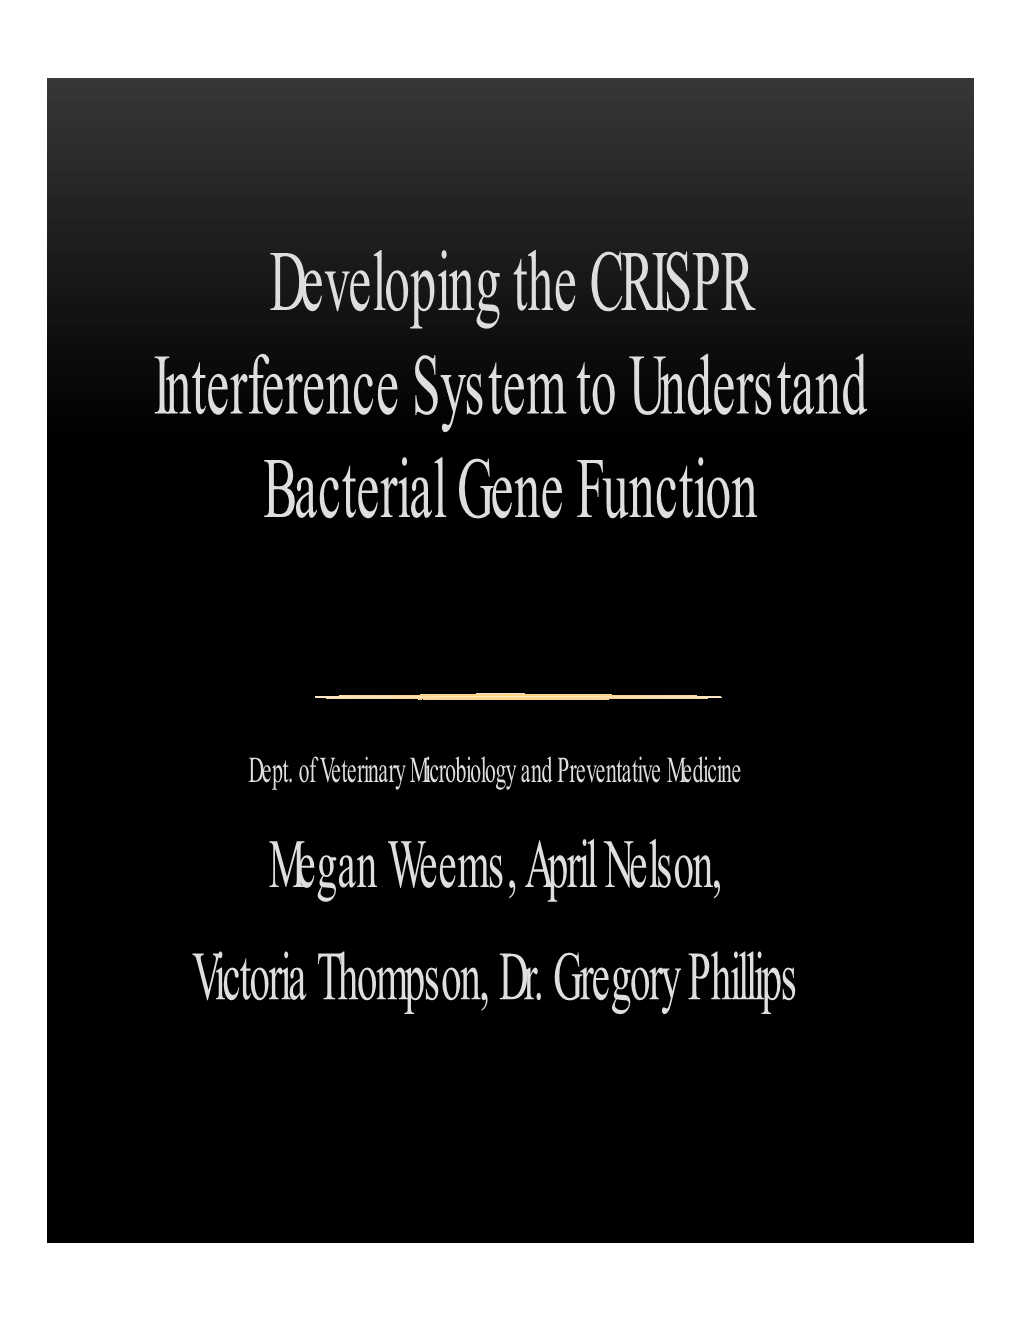 Developing the CRISPR Interference System to Understand Bacterial Gene Function